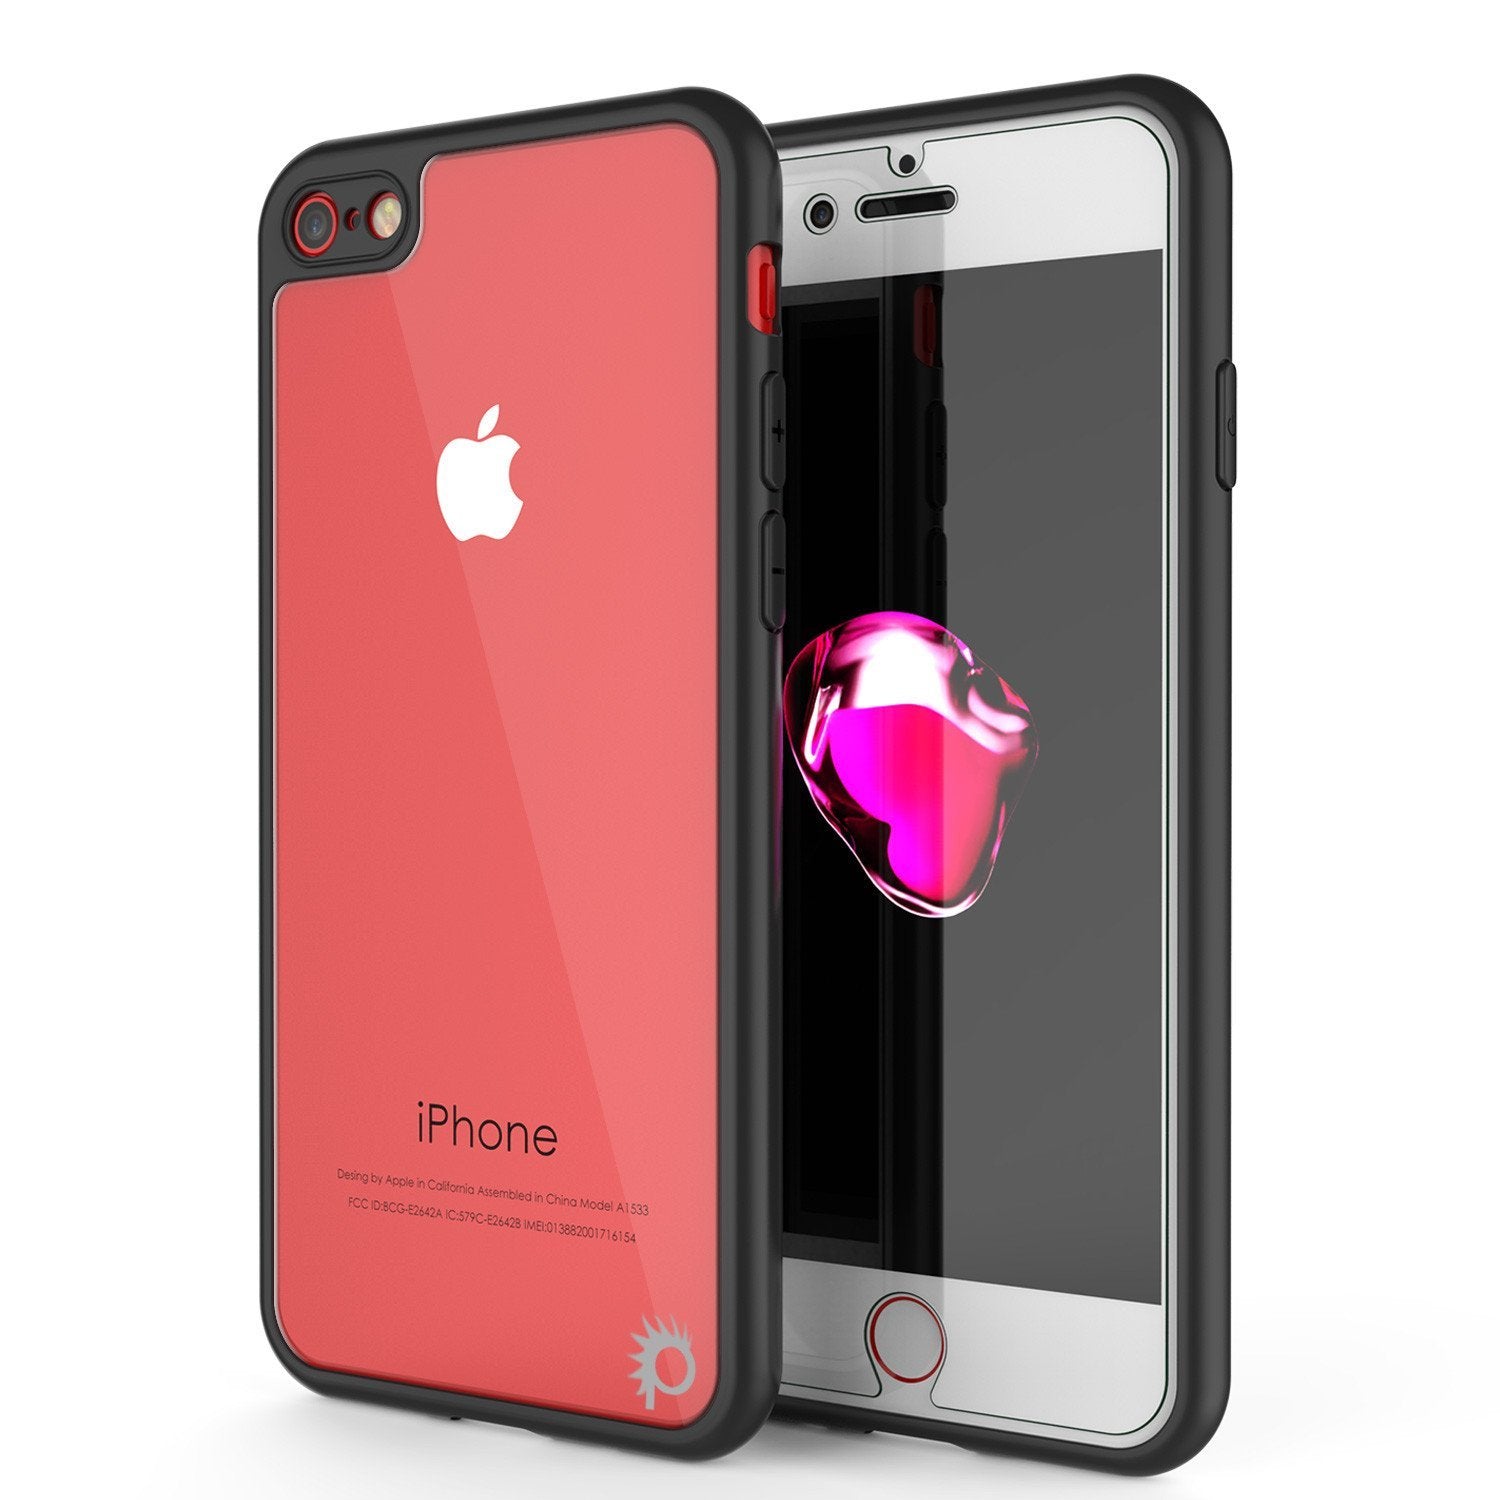 iPhone 8 Case [MASK Series] [BLACK] Full Body Hybrid Dual Layer TPU Cover W/ protective Tempered Glass Screen Protector